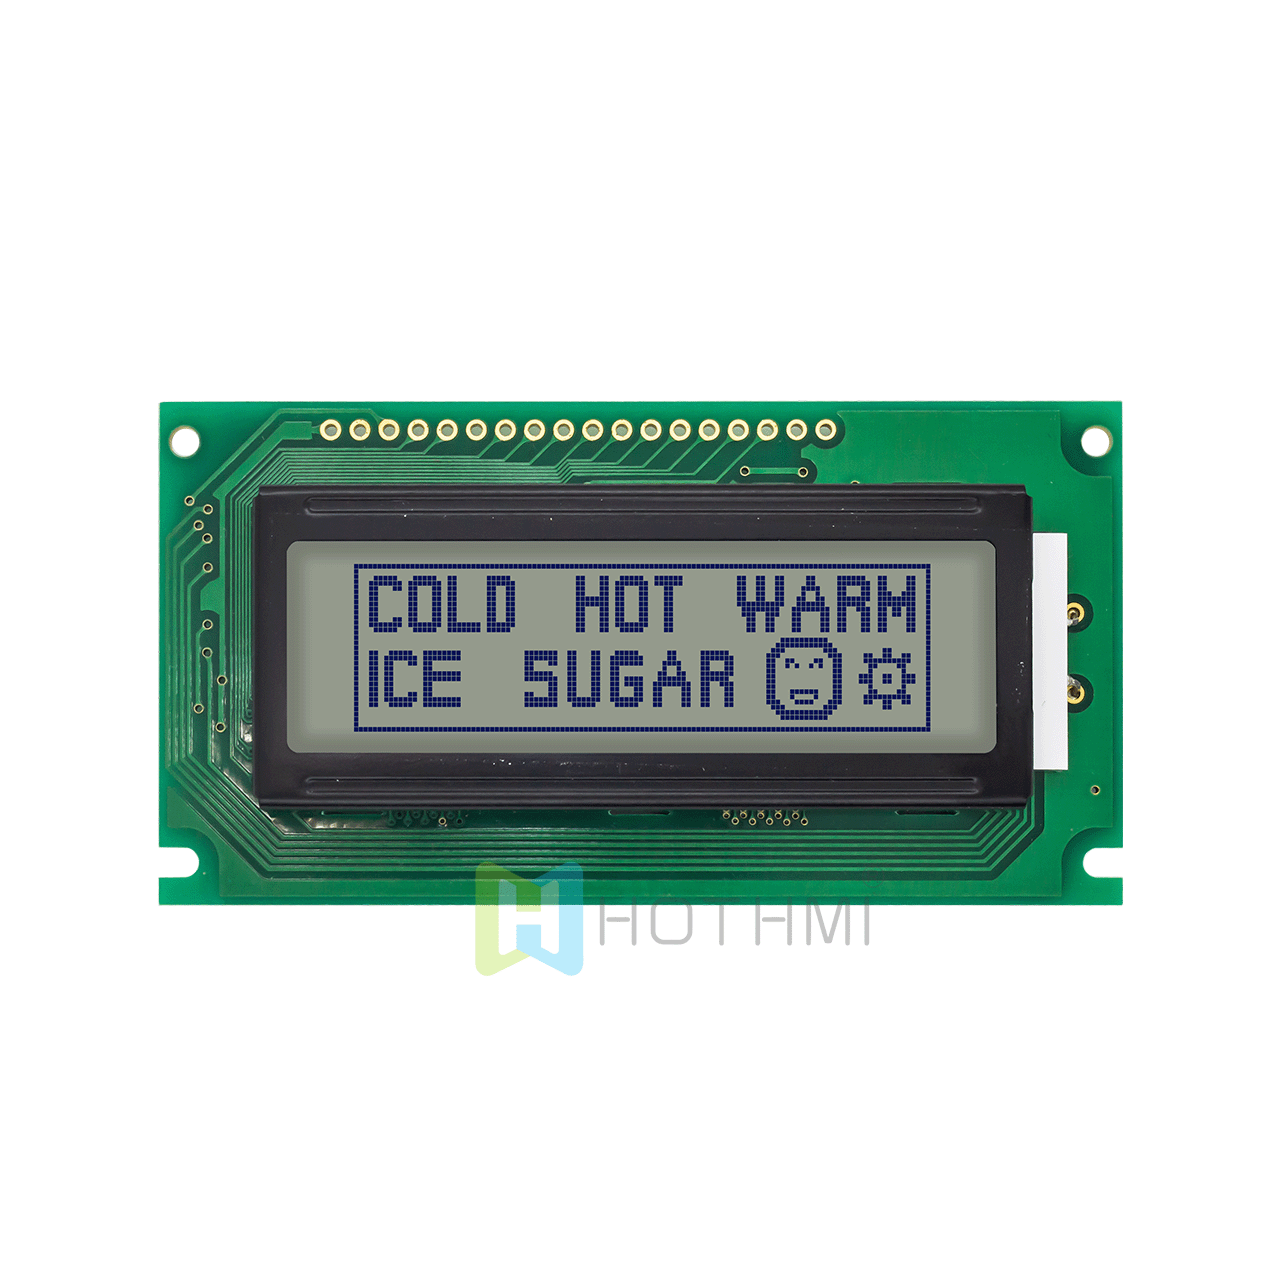 2.5"122X32 Graphic LCD Module | DFSTN-Black Display with Side White Backlight and Pin Header | 5.0v | Monochrome Display